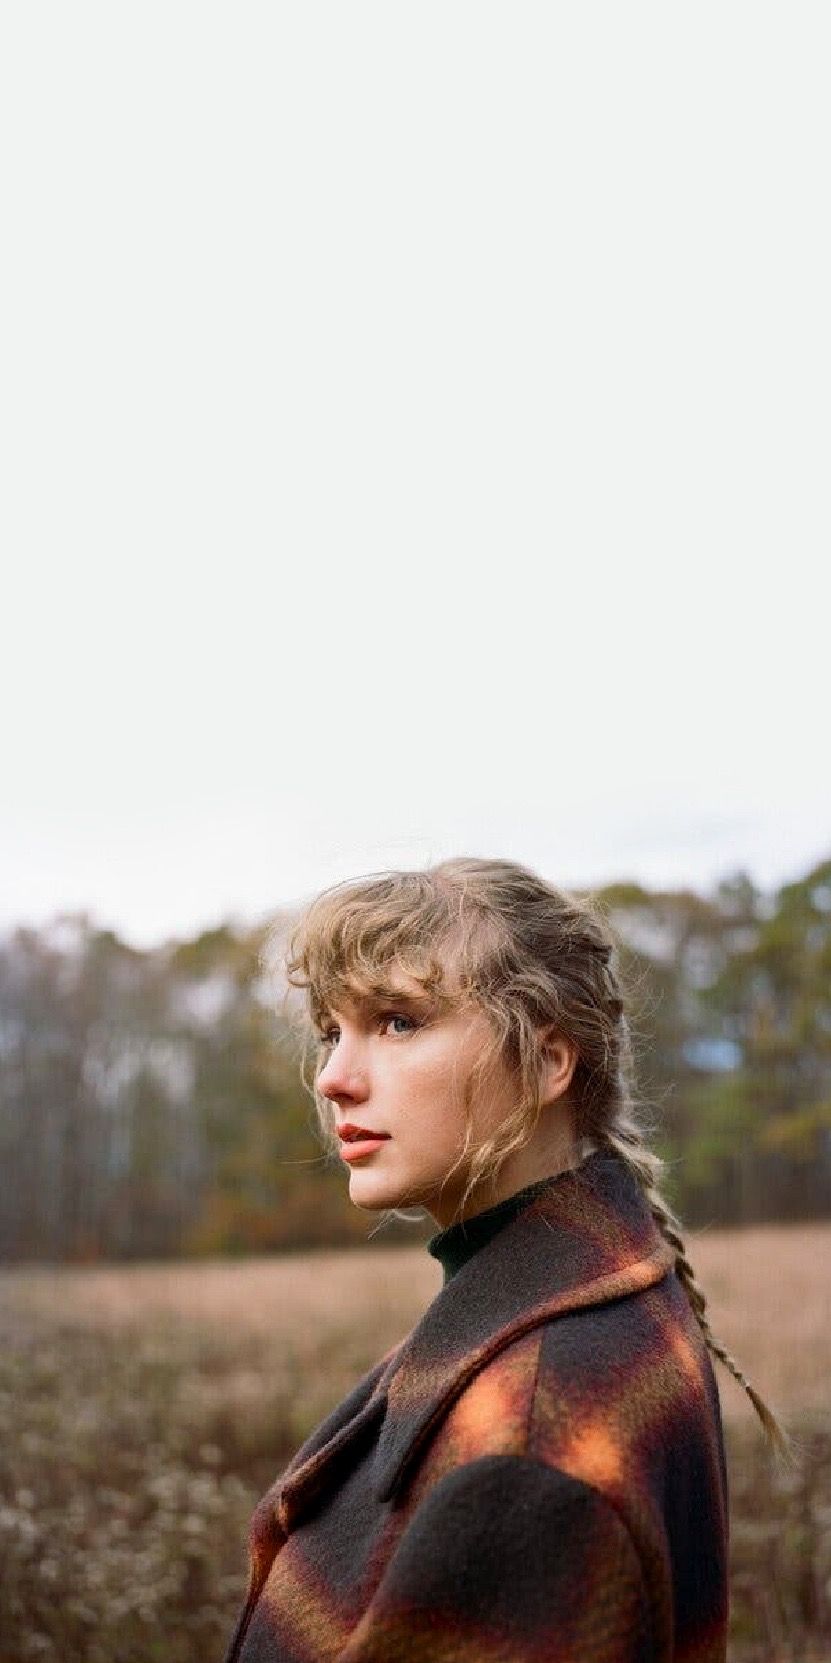 Taylor Swift Evermore Album Wallpapers